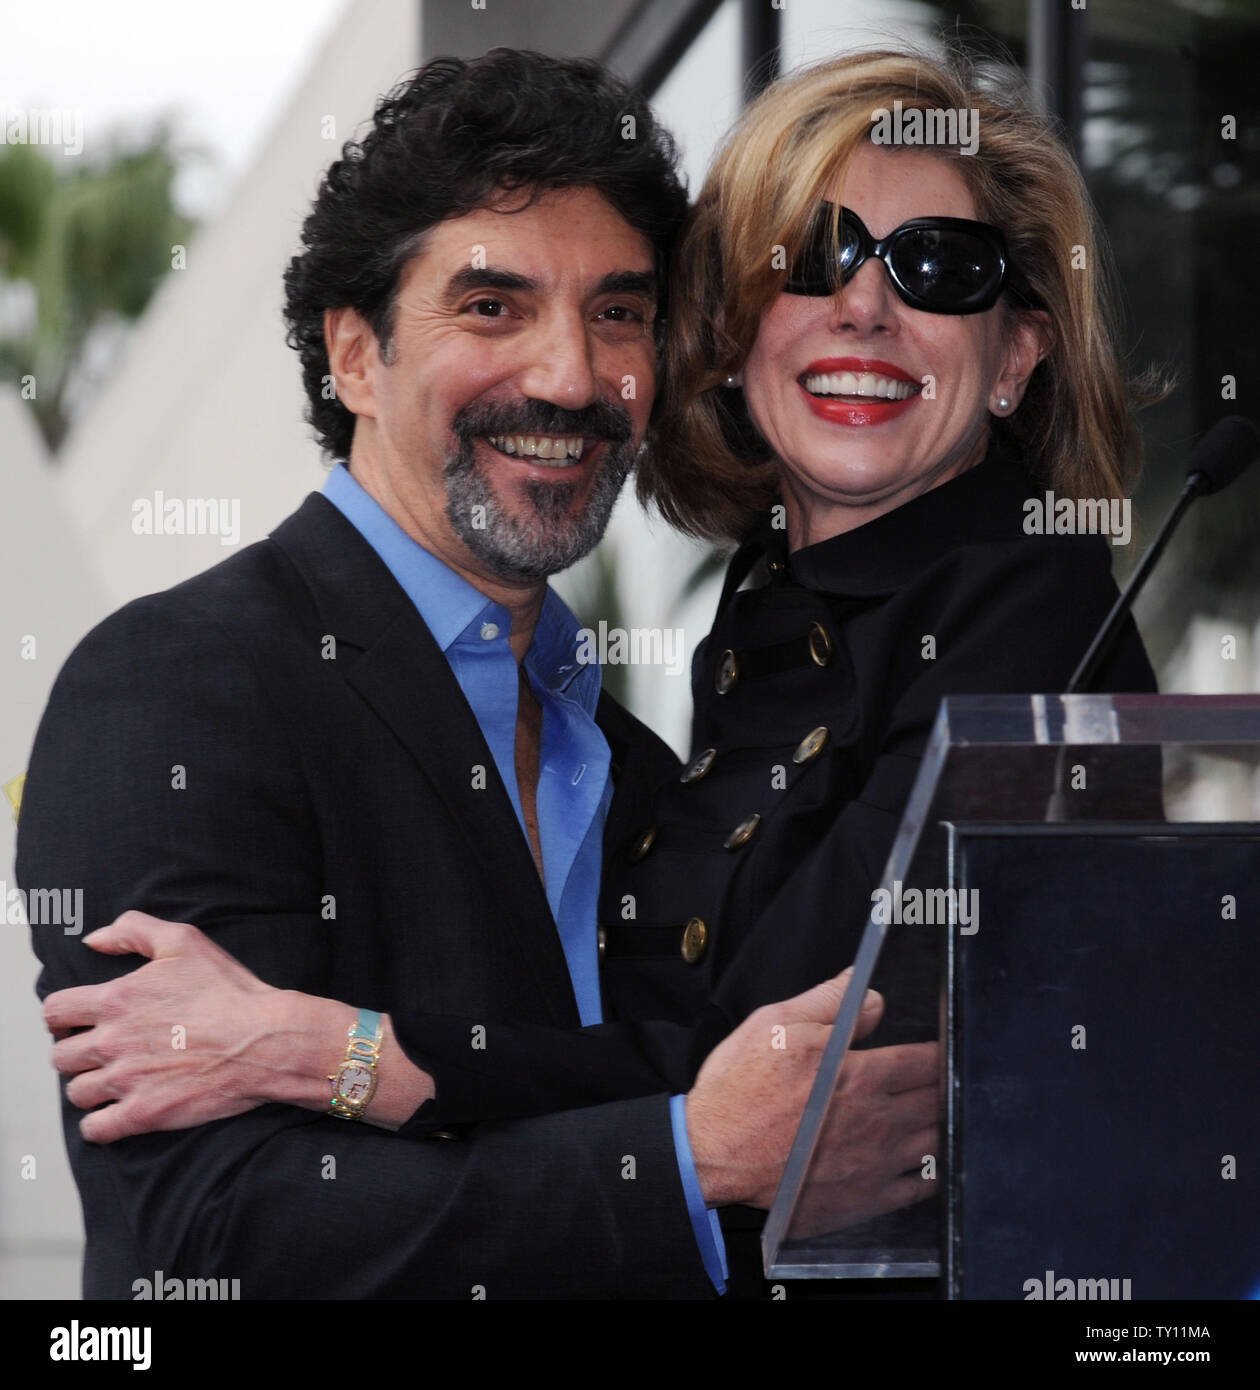 Chuck Lorre (L) is embraced by actress Christine Baranski during ceremonies honoring him with the 2,380th star on the Hollywood Walk of Fame in Los Angeles on March 12, 2009. Lorre produces and co-created CBS' 'The Big Bang Theory' and 'Two and Half Men'. He also produced 'Dharma & Greg'' and 'Grace Under Fire'. (UPI Photo/Jim Ruymen) Stock Photo